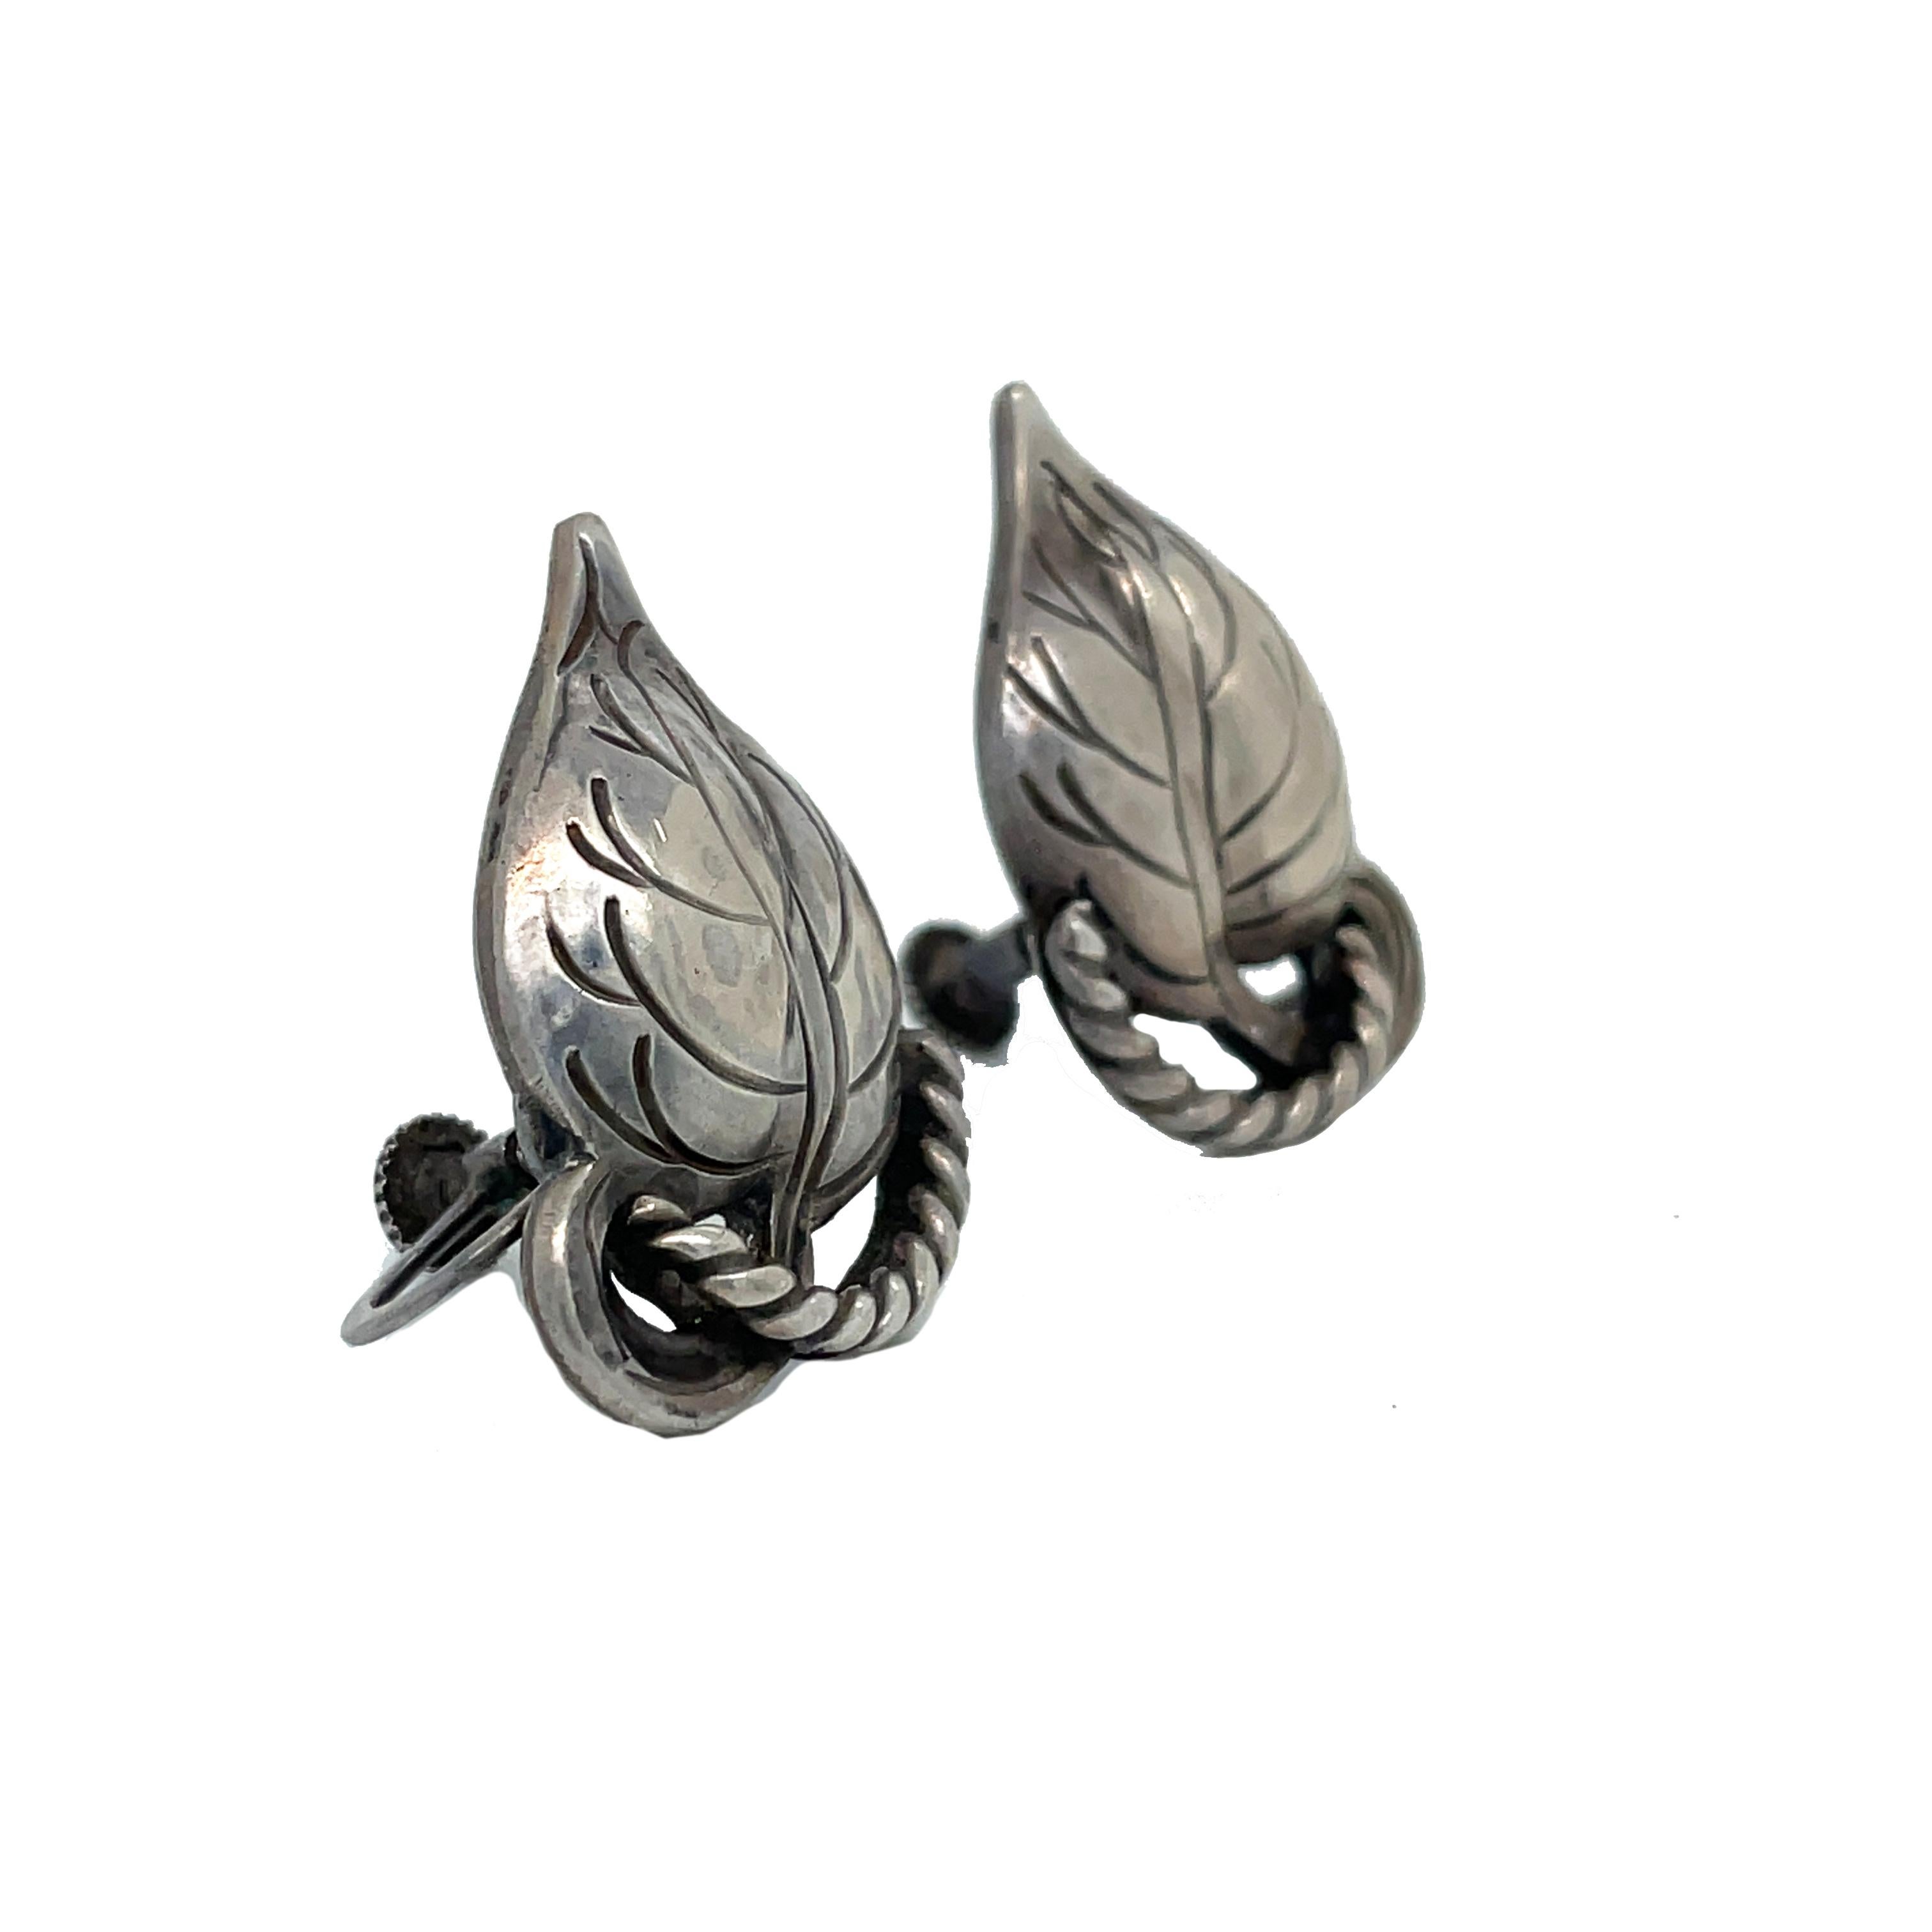 This is a lovely pair of Arts & Crafts sterling silver screw-back earrings signed by Kalo that features a leaf motif. The earrings are stamped KALO and Sterling on the back. This is a lovely pair of everyday earrings that would pair beautifully with